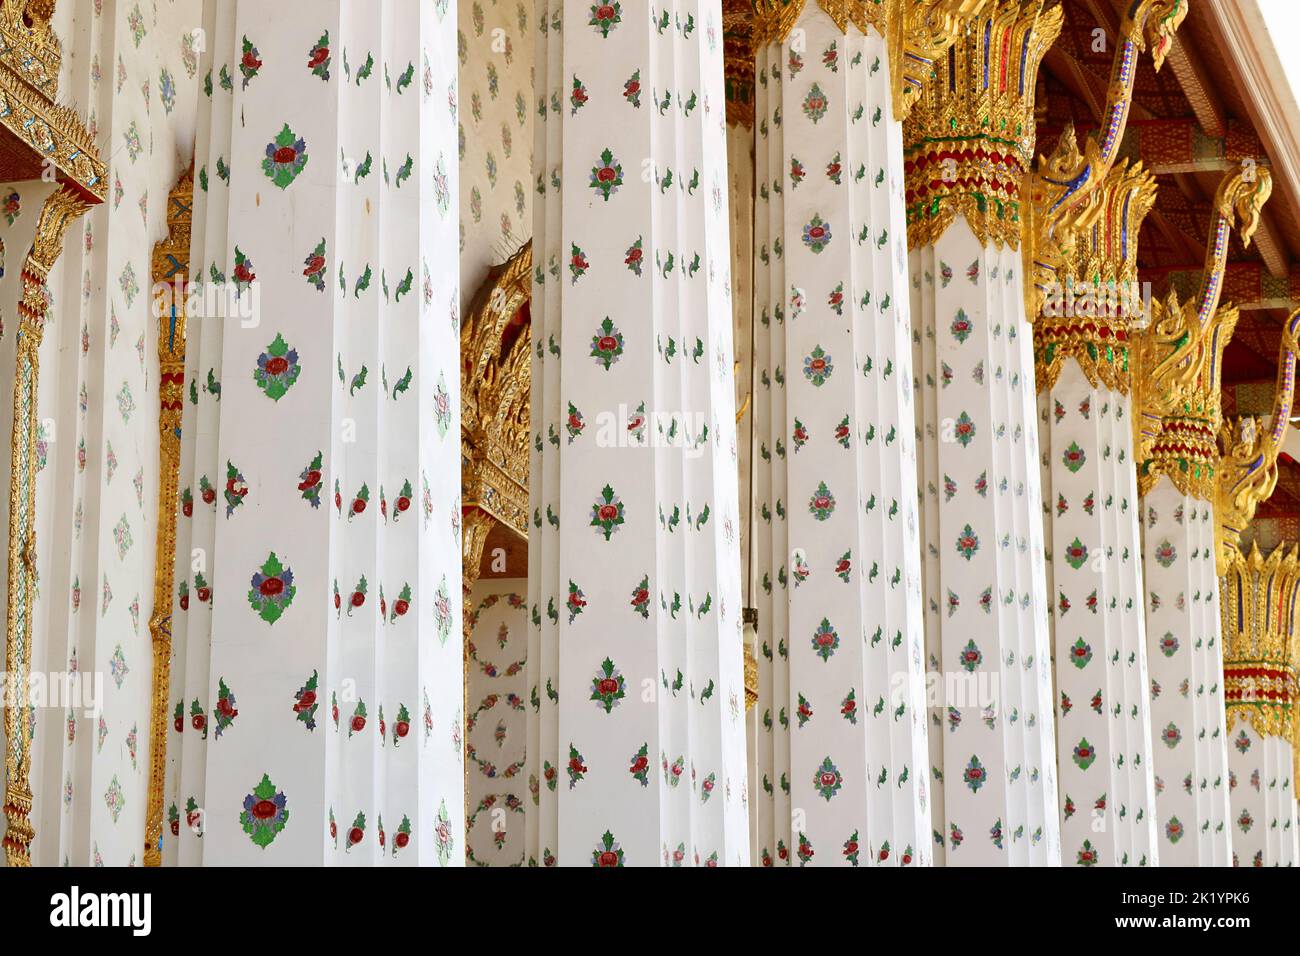 Gorgeous Columns of the Ordination Hall of Wat Arun Encrusted with Beautiful Glazed Ceramic Floral Patterns, Bangkok, Thailand Stock Photo